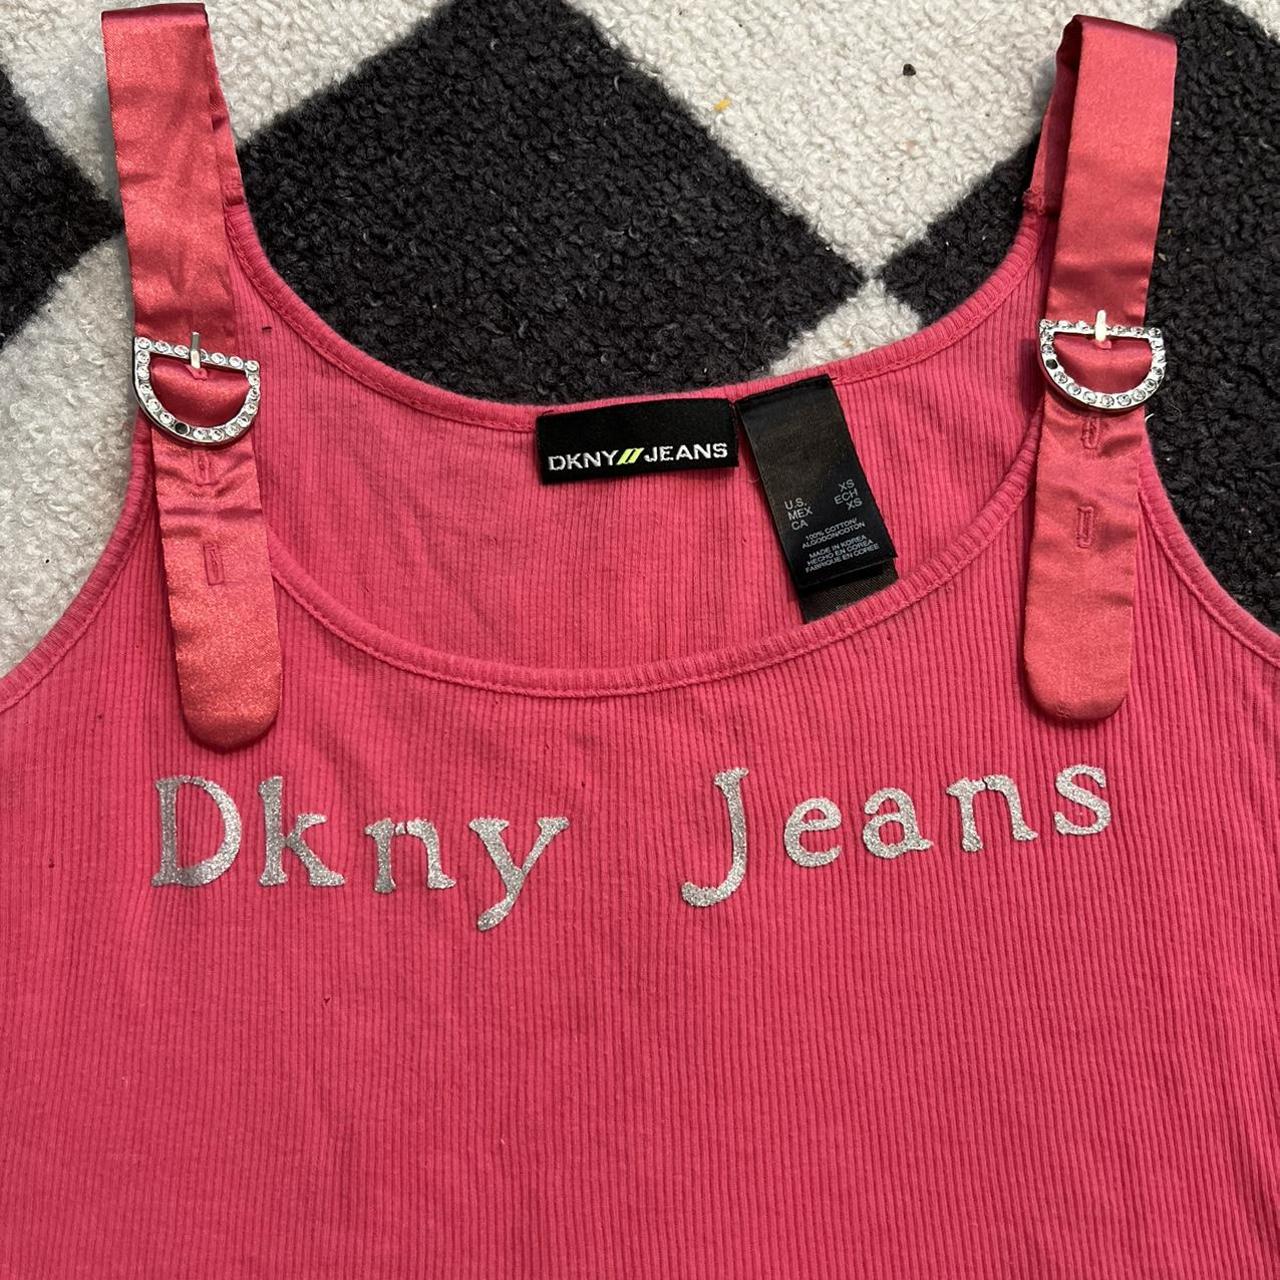 DKNY Women's Pink and Silver Vest (2)